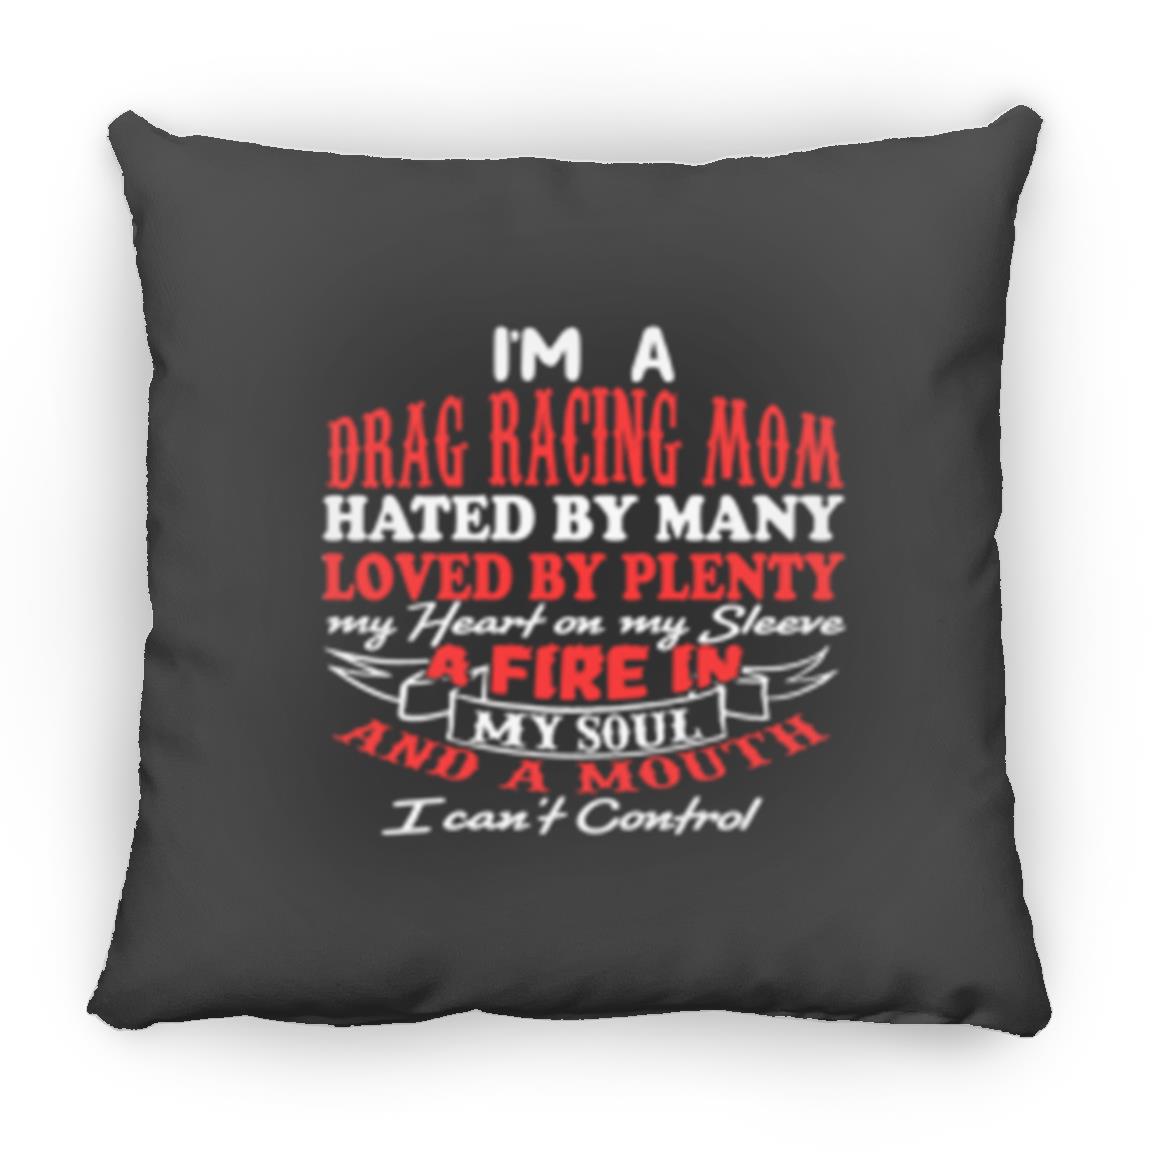 I'm A Drag Racing Mom Hated By Many Loved By Plenty Large Square Pillow